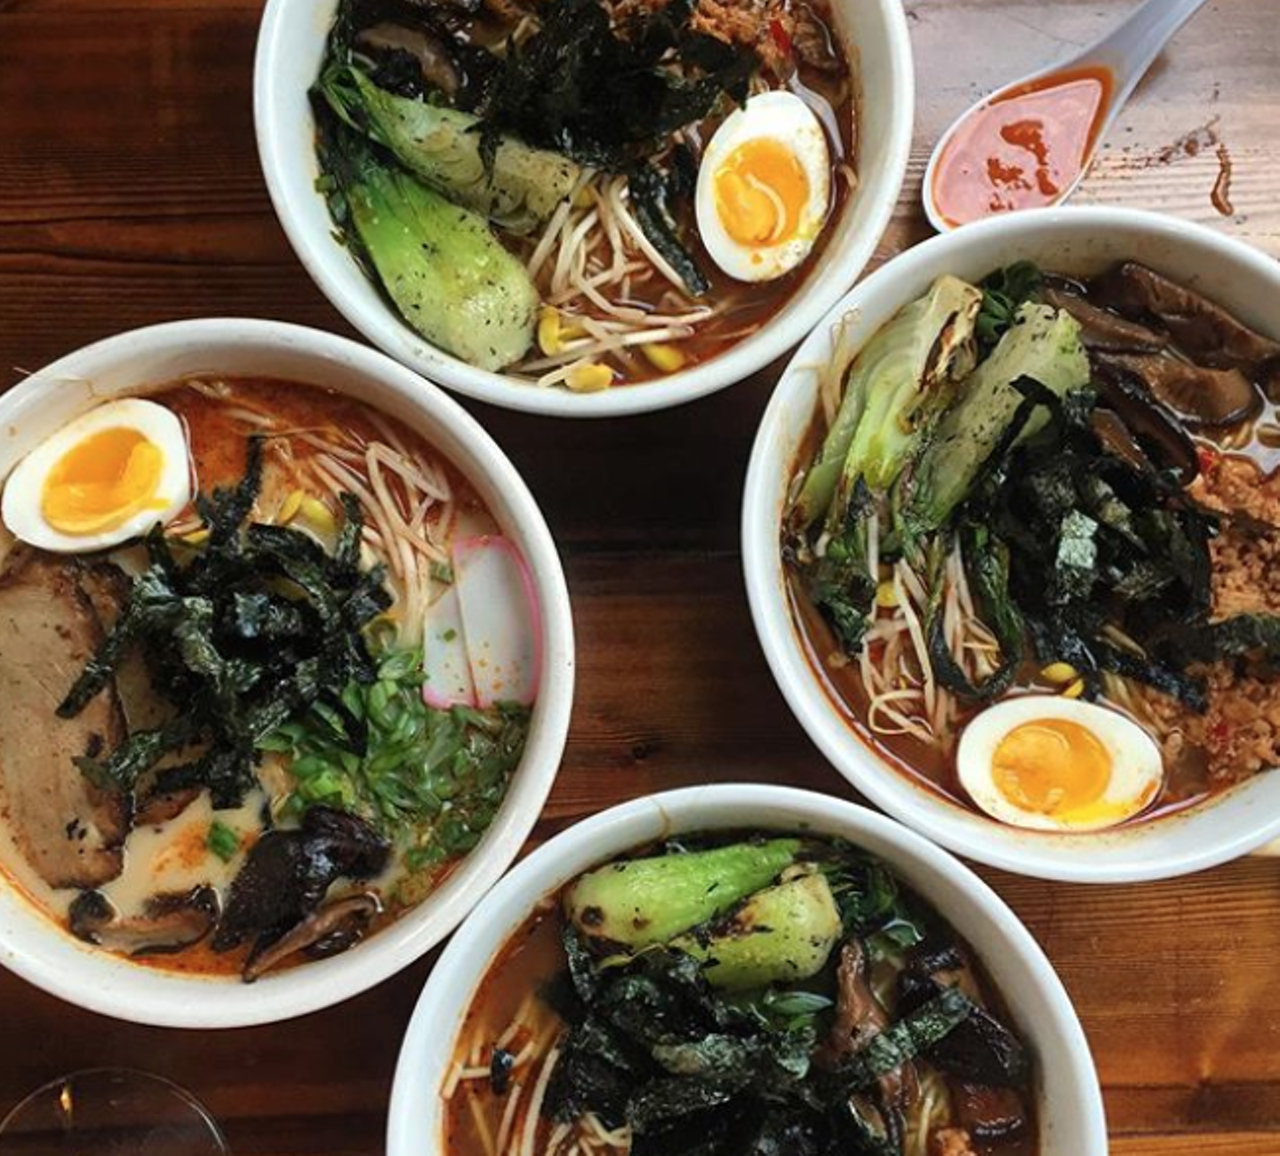 Kimura
152 E Pecan St, (210) 444-0702, kimurasa.com
The OG ramen bar is coming back to Flavor. Owned by Michael Sohocki, Kimura uses local ingredients to create savory broths and specials.
Photo via Instagram / chifoodiegram